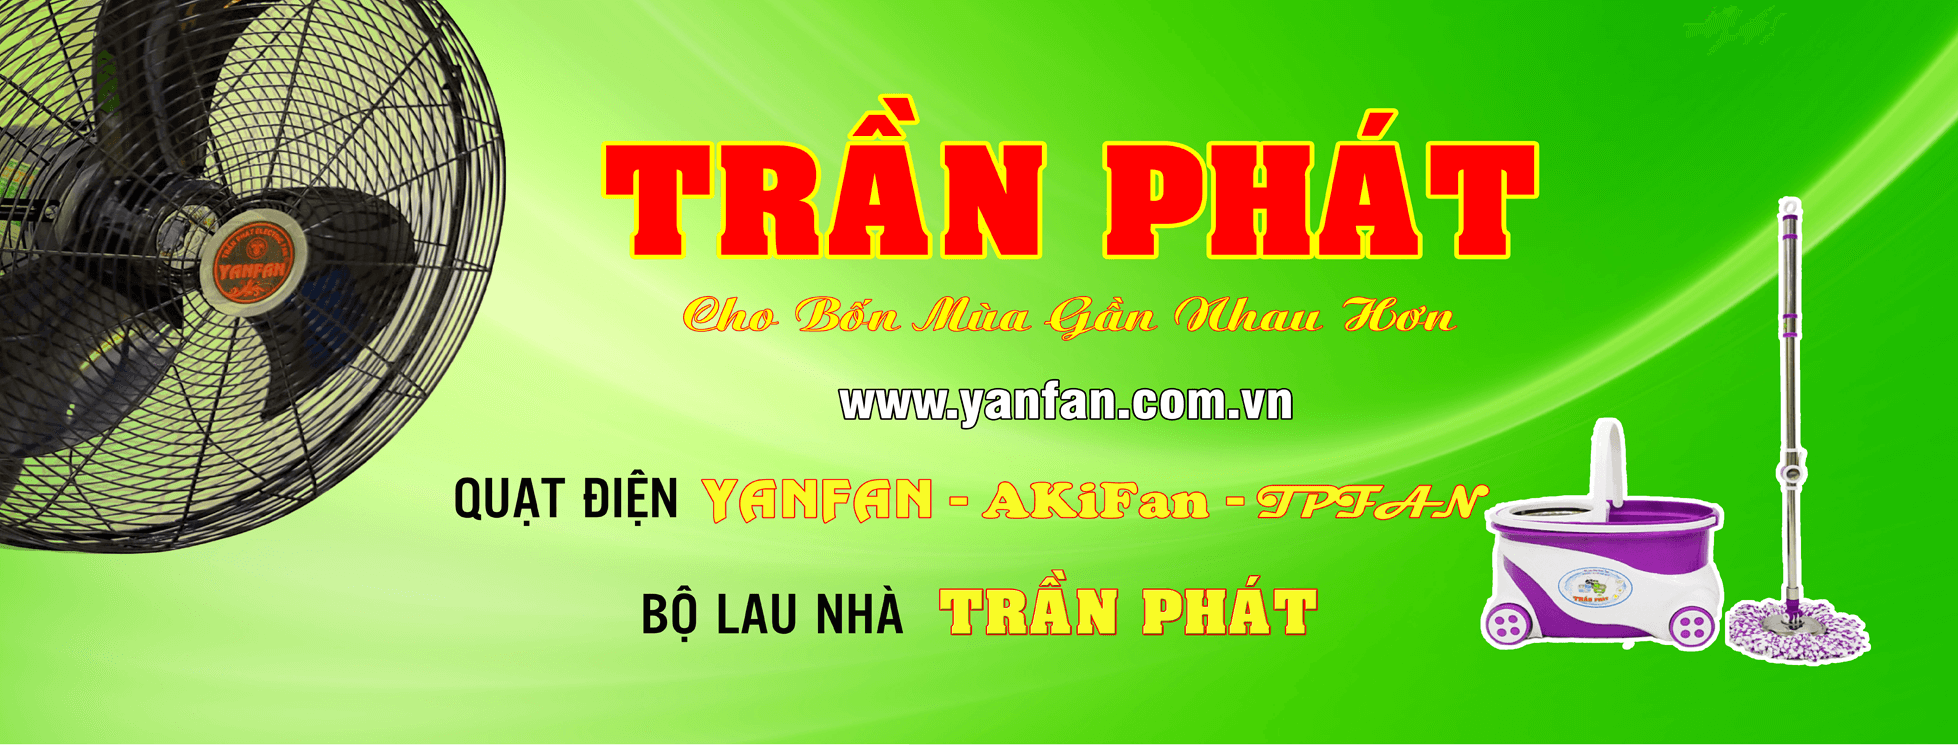 Tran Phat is a professional electric fan manufacturer